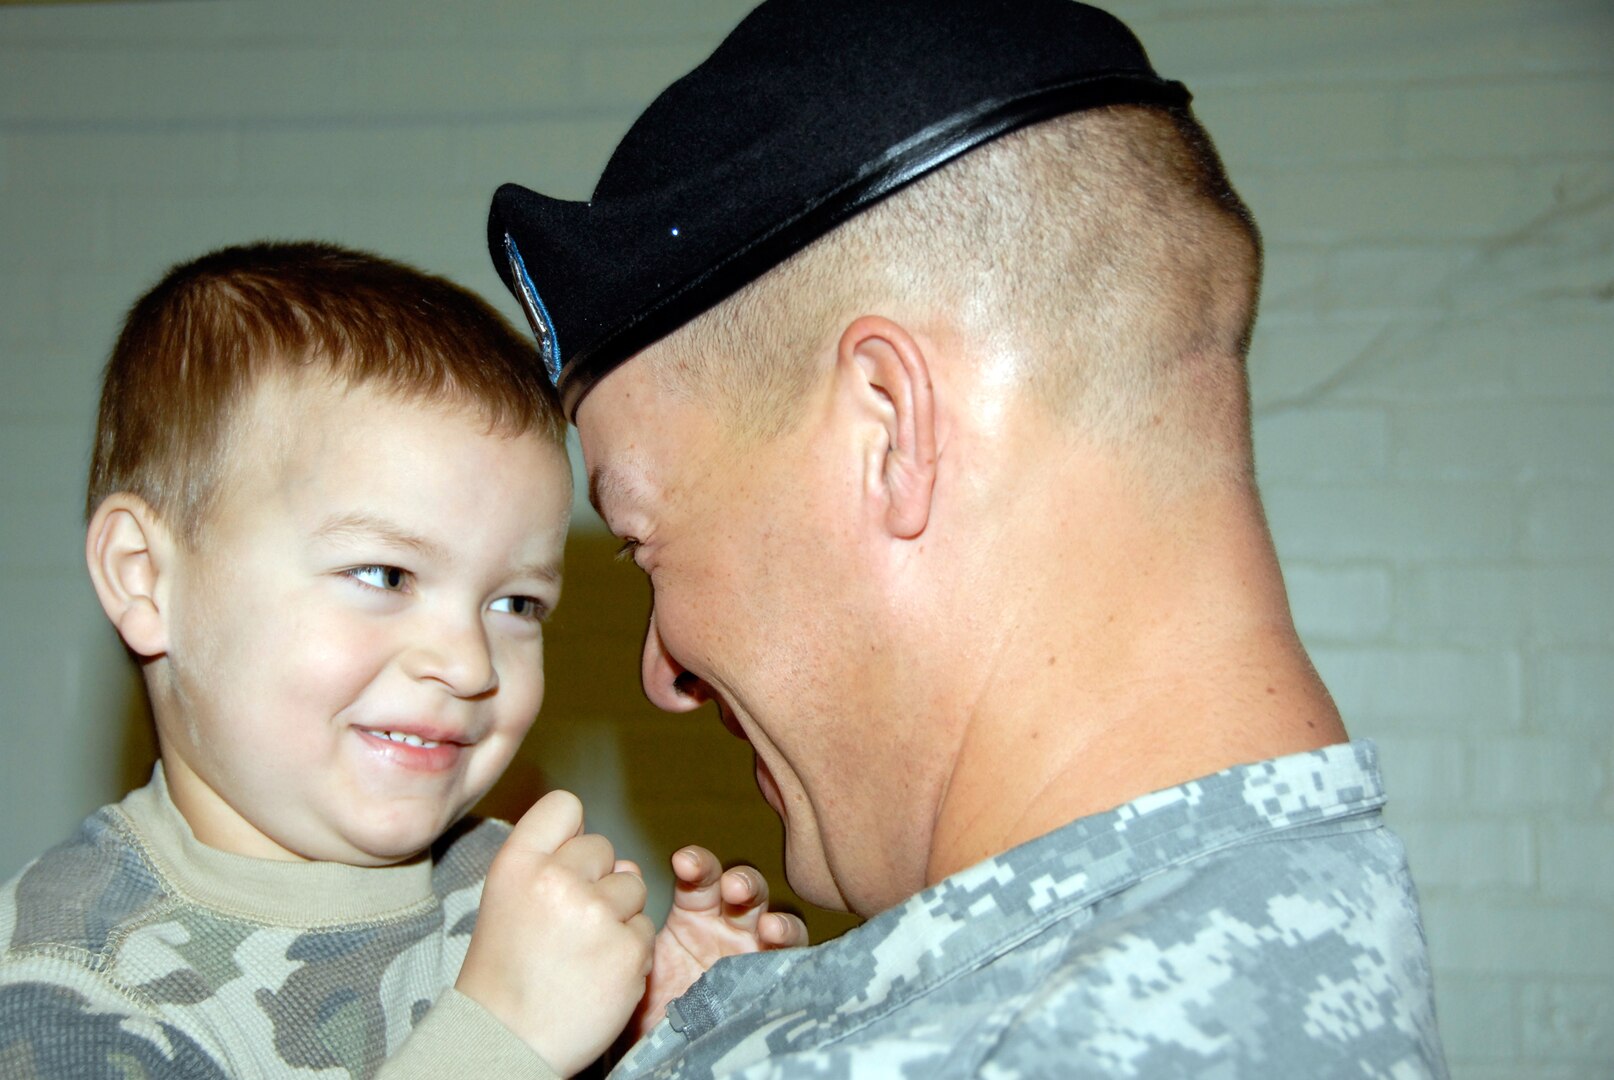 Tyler Dudley, left, is lovingly held by his dad, Army Capt. Brian Dudley, right, at the departure ceremony of the 363rd Explosive Ordnance Disposal Company from the National Guard Armory in Coolidge, Ariz., on Saturday, February 21, 2009. The senior Dudley commands 24 other Soldiers responsible for ordnance removal in Iraq and Afghanistan for the coming year.